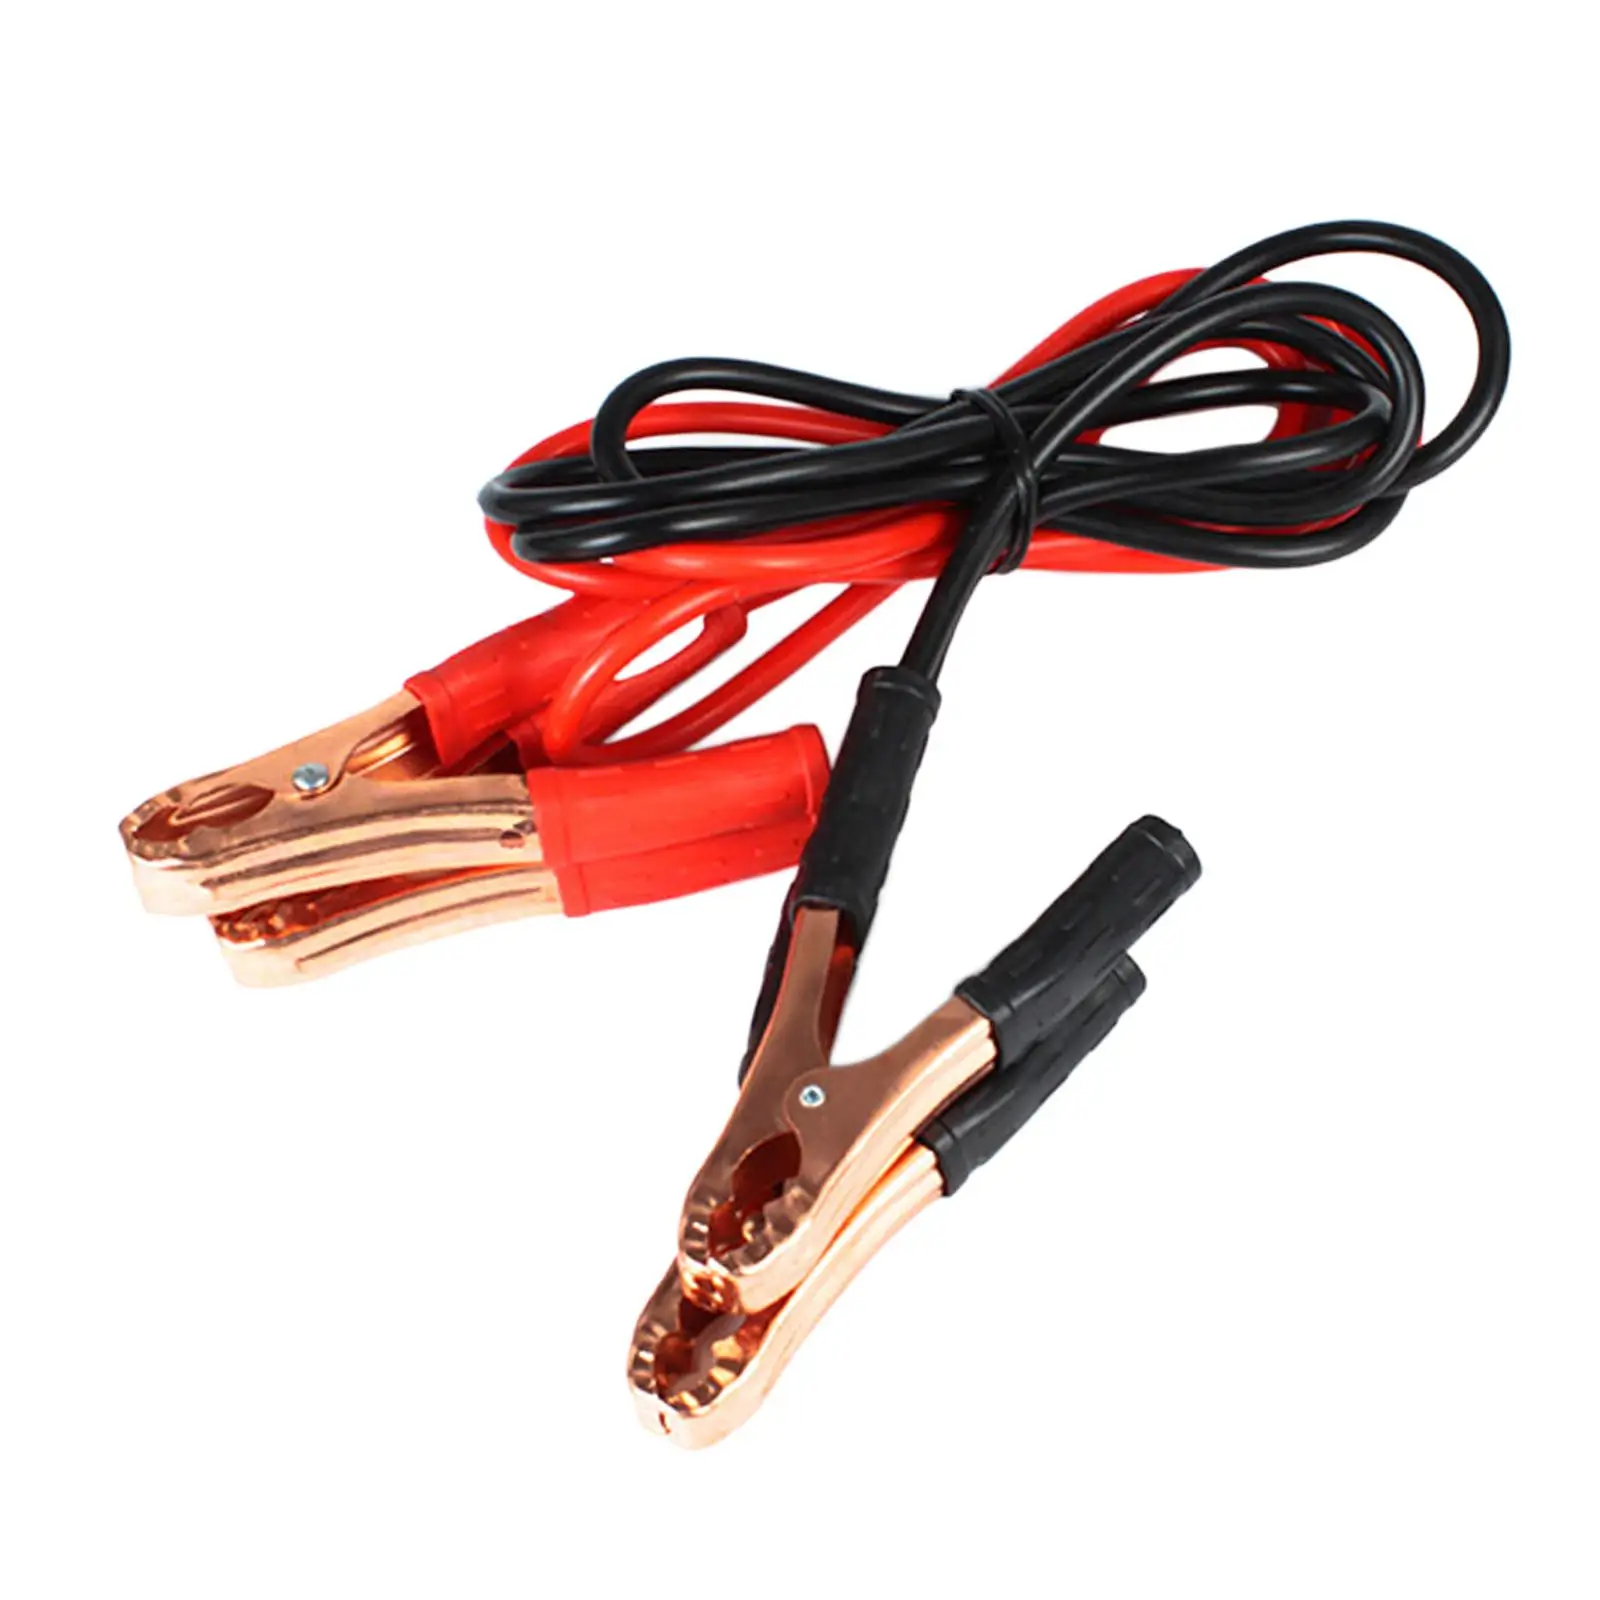 Jumper Cable, PVC Automotive Replacement Jump Starting for Outdoor